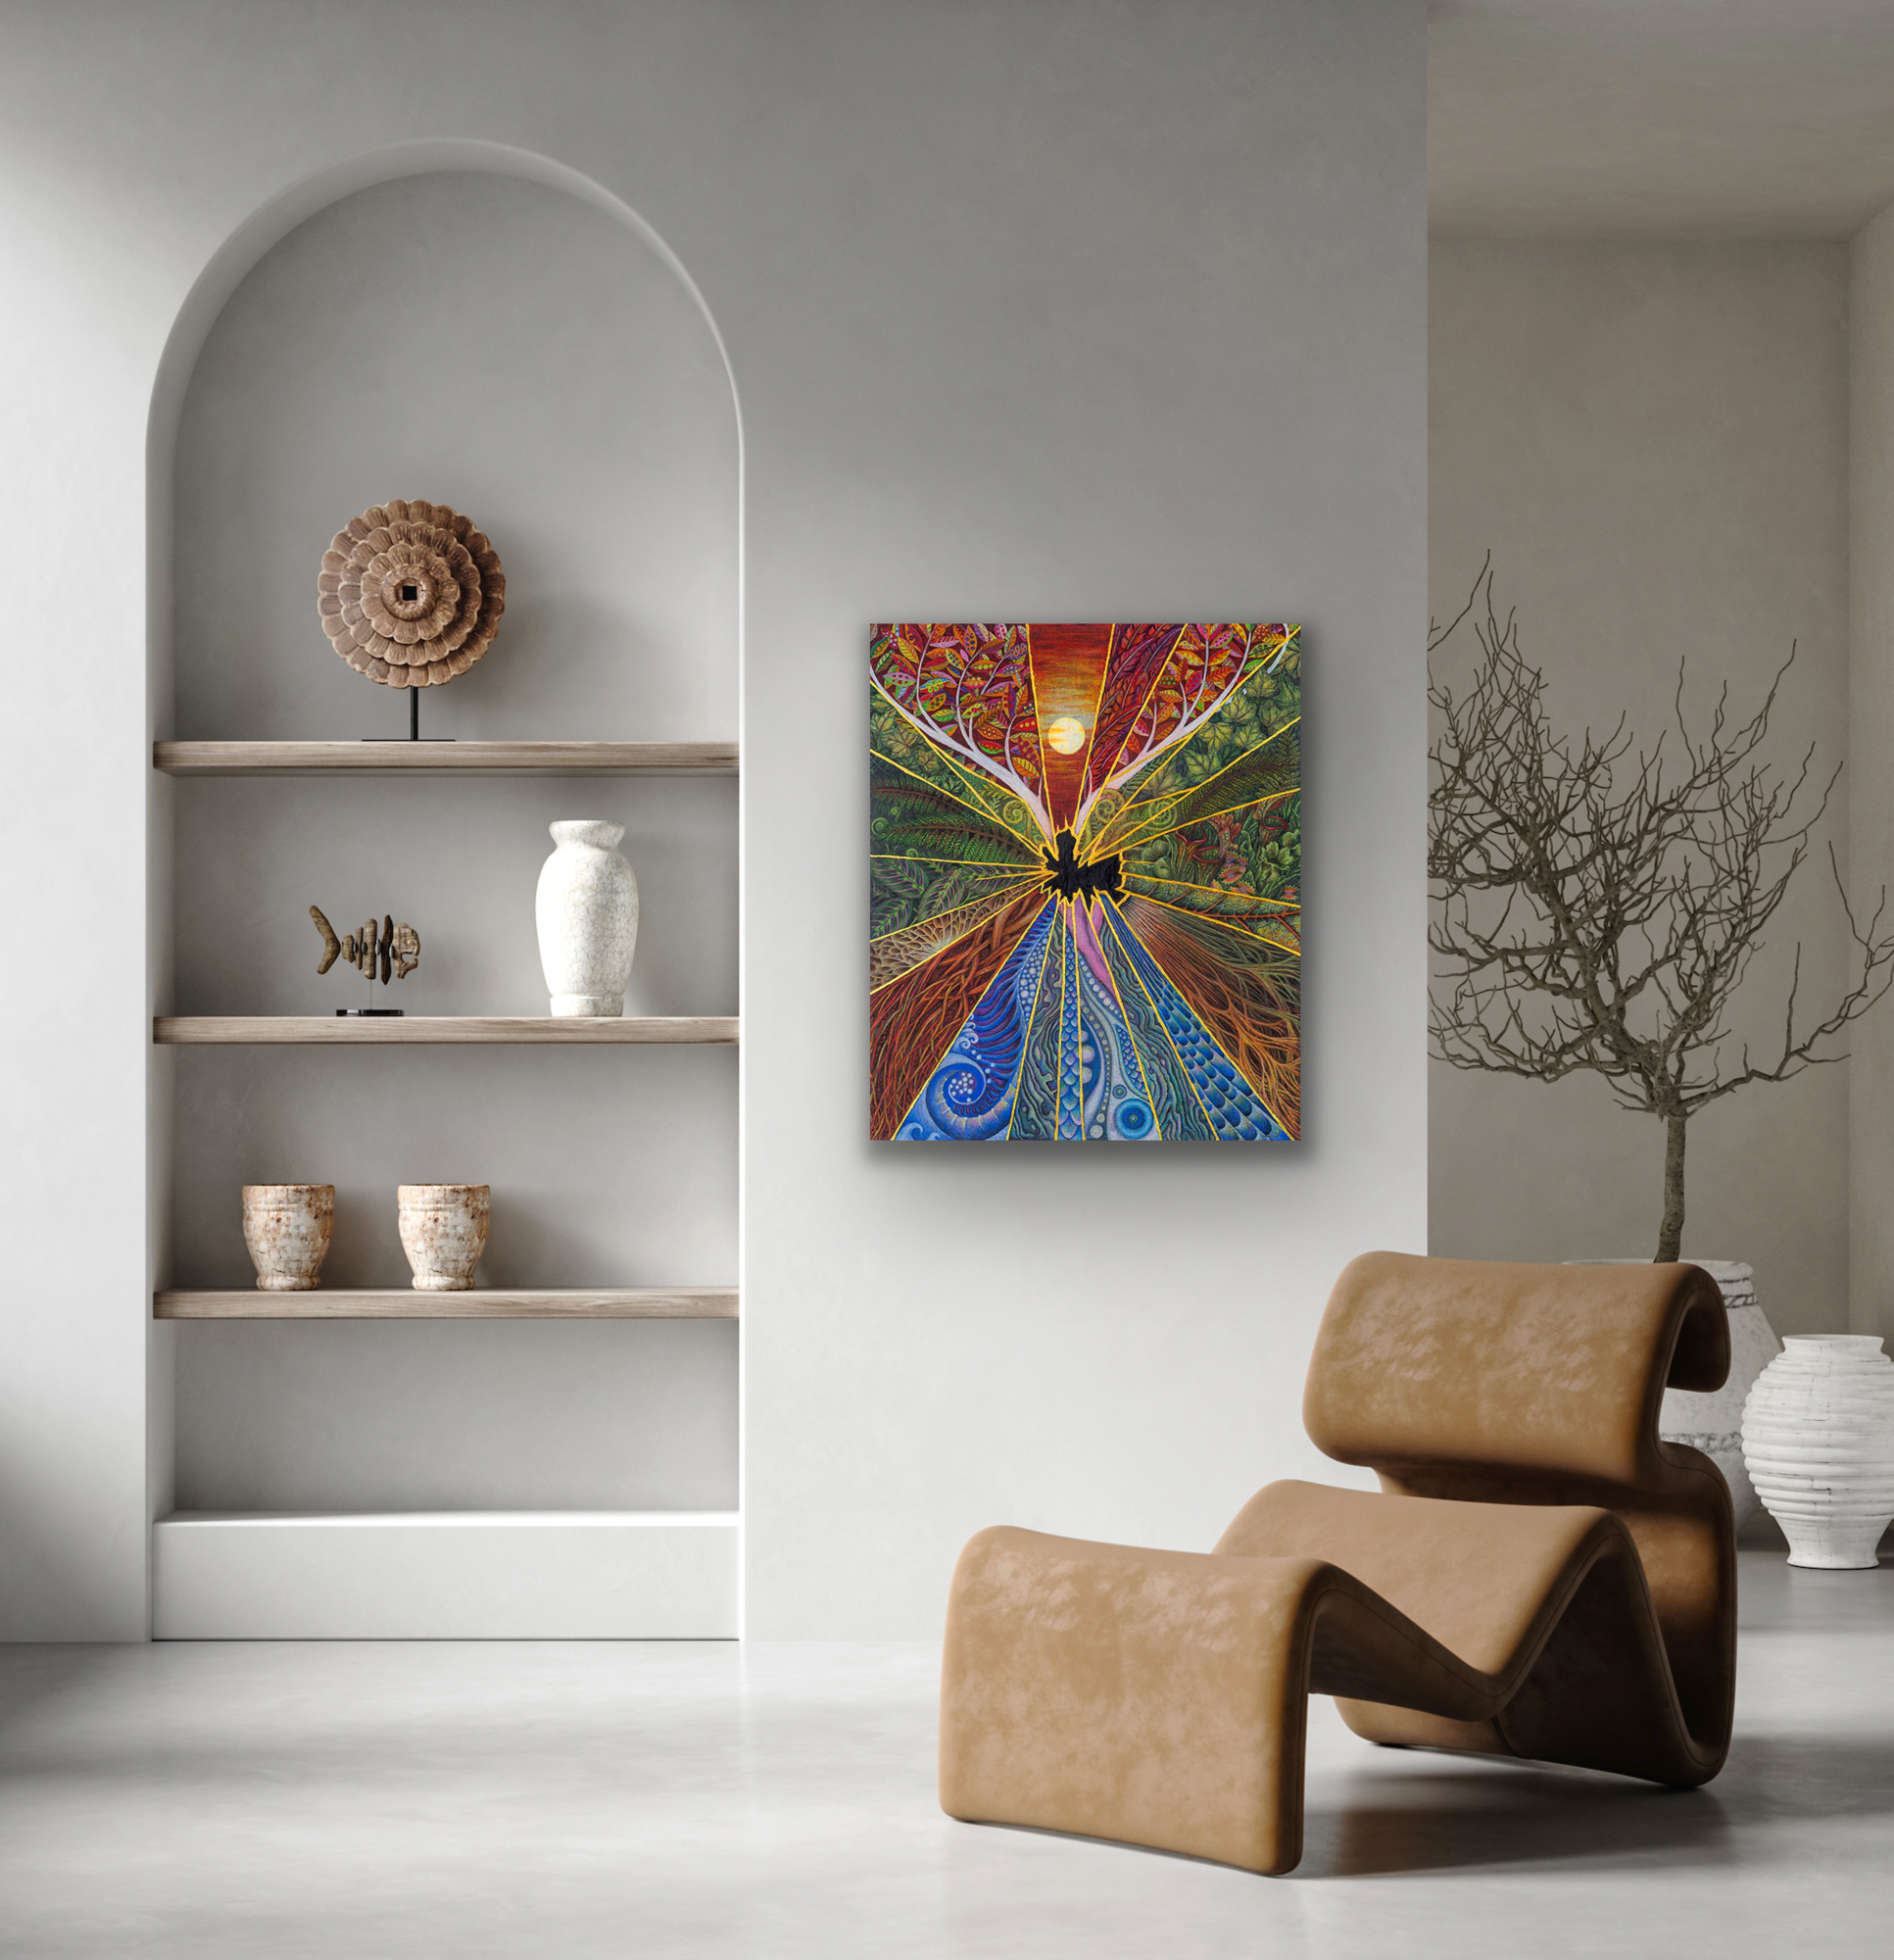 The work of art comes in three different canvas print sizes.